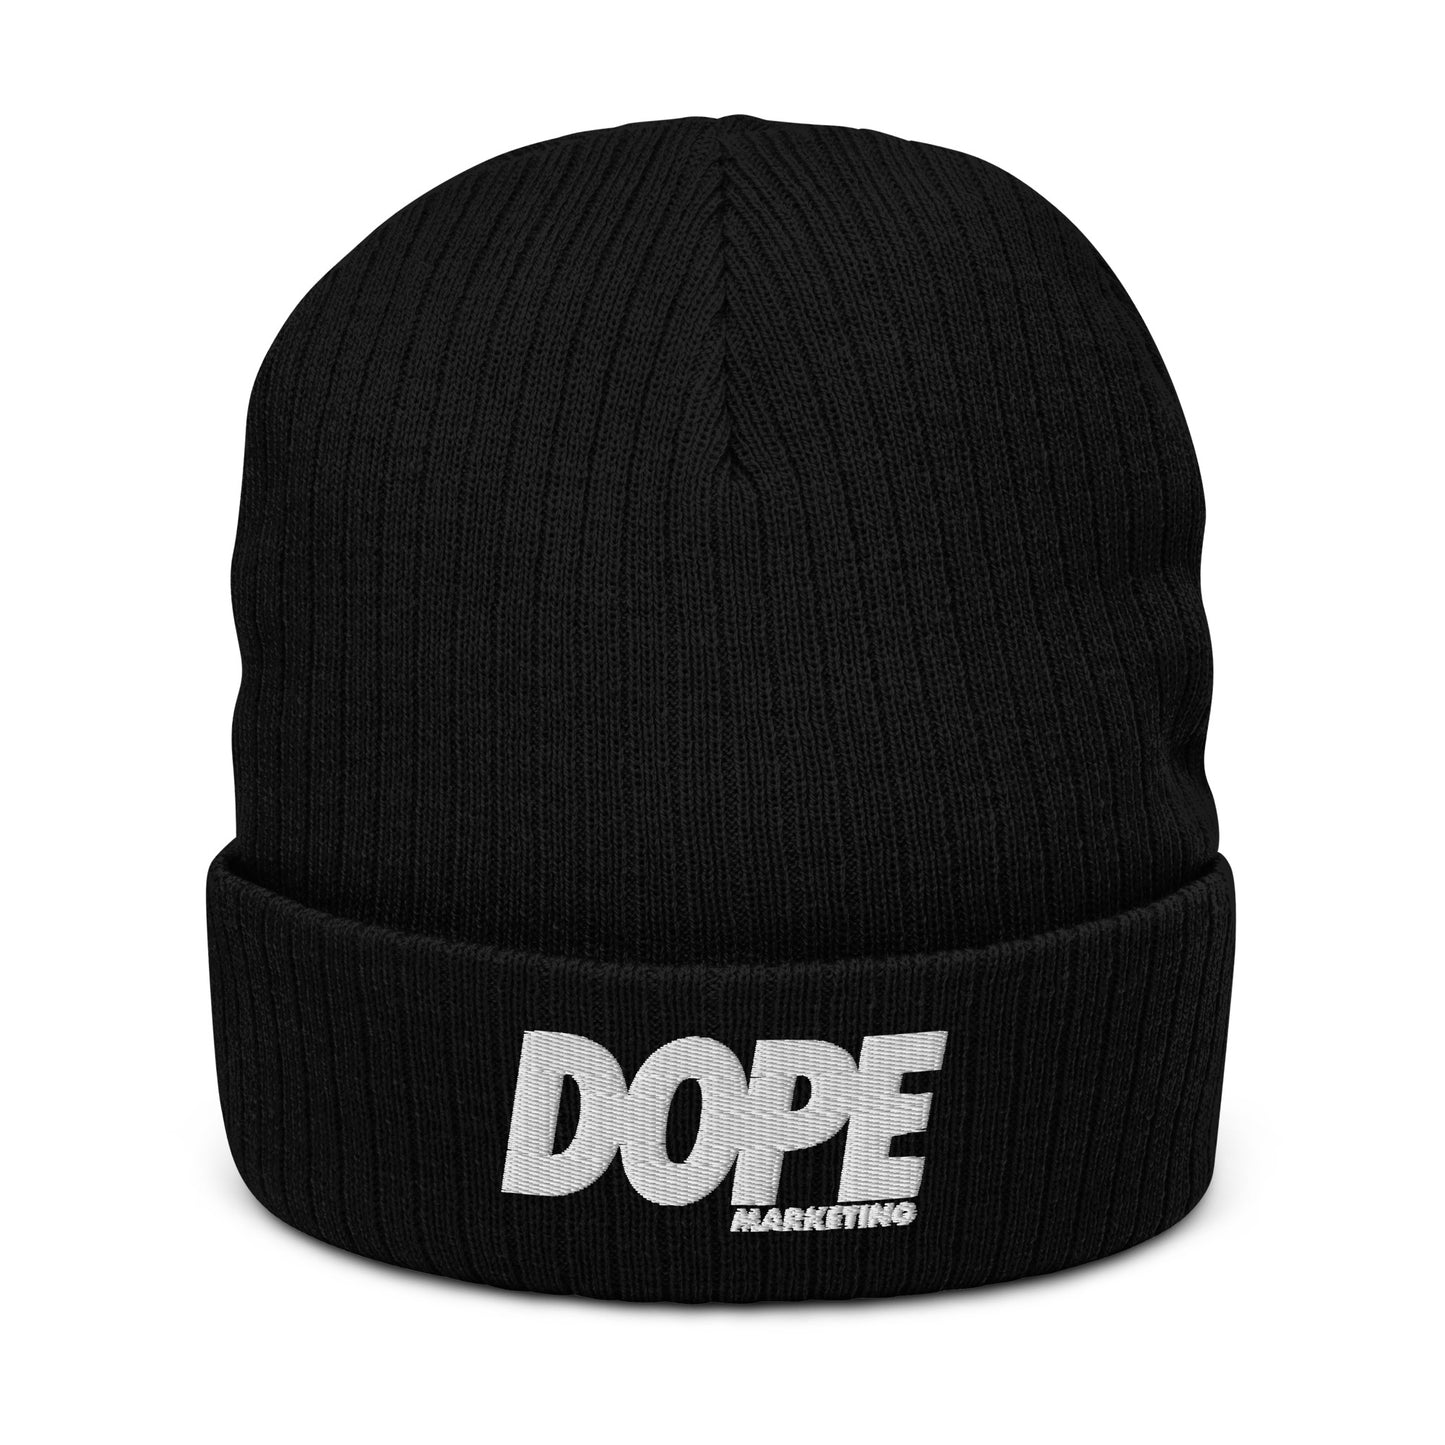 DOPE Ribbed knit beanie